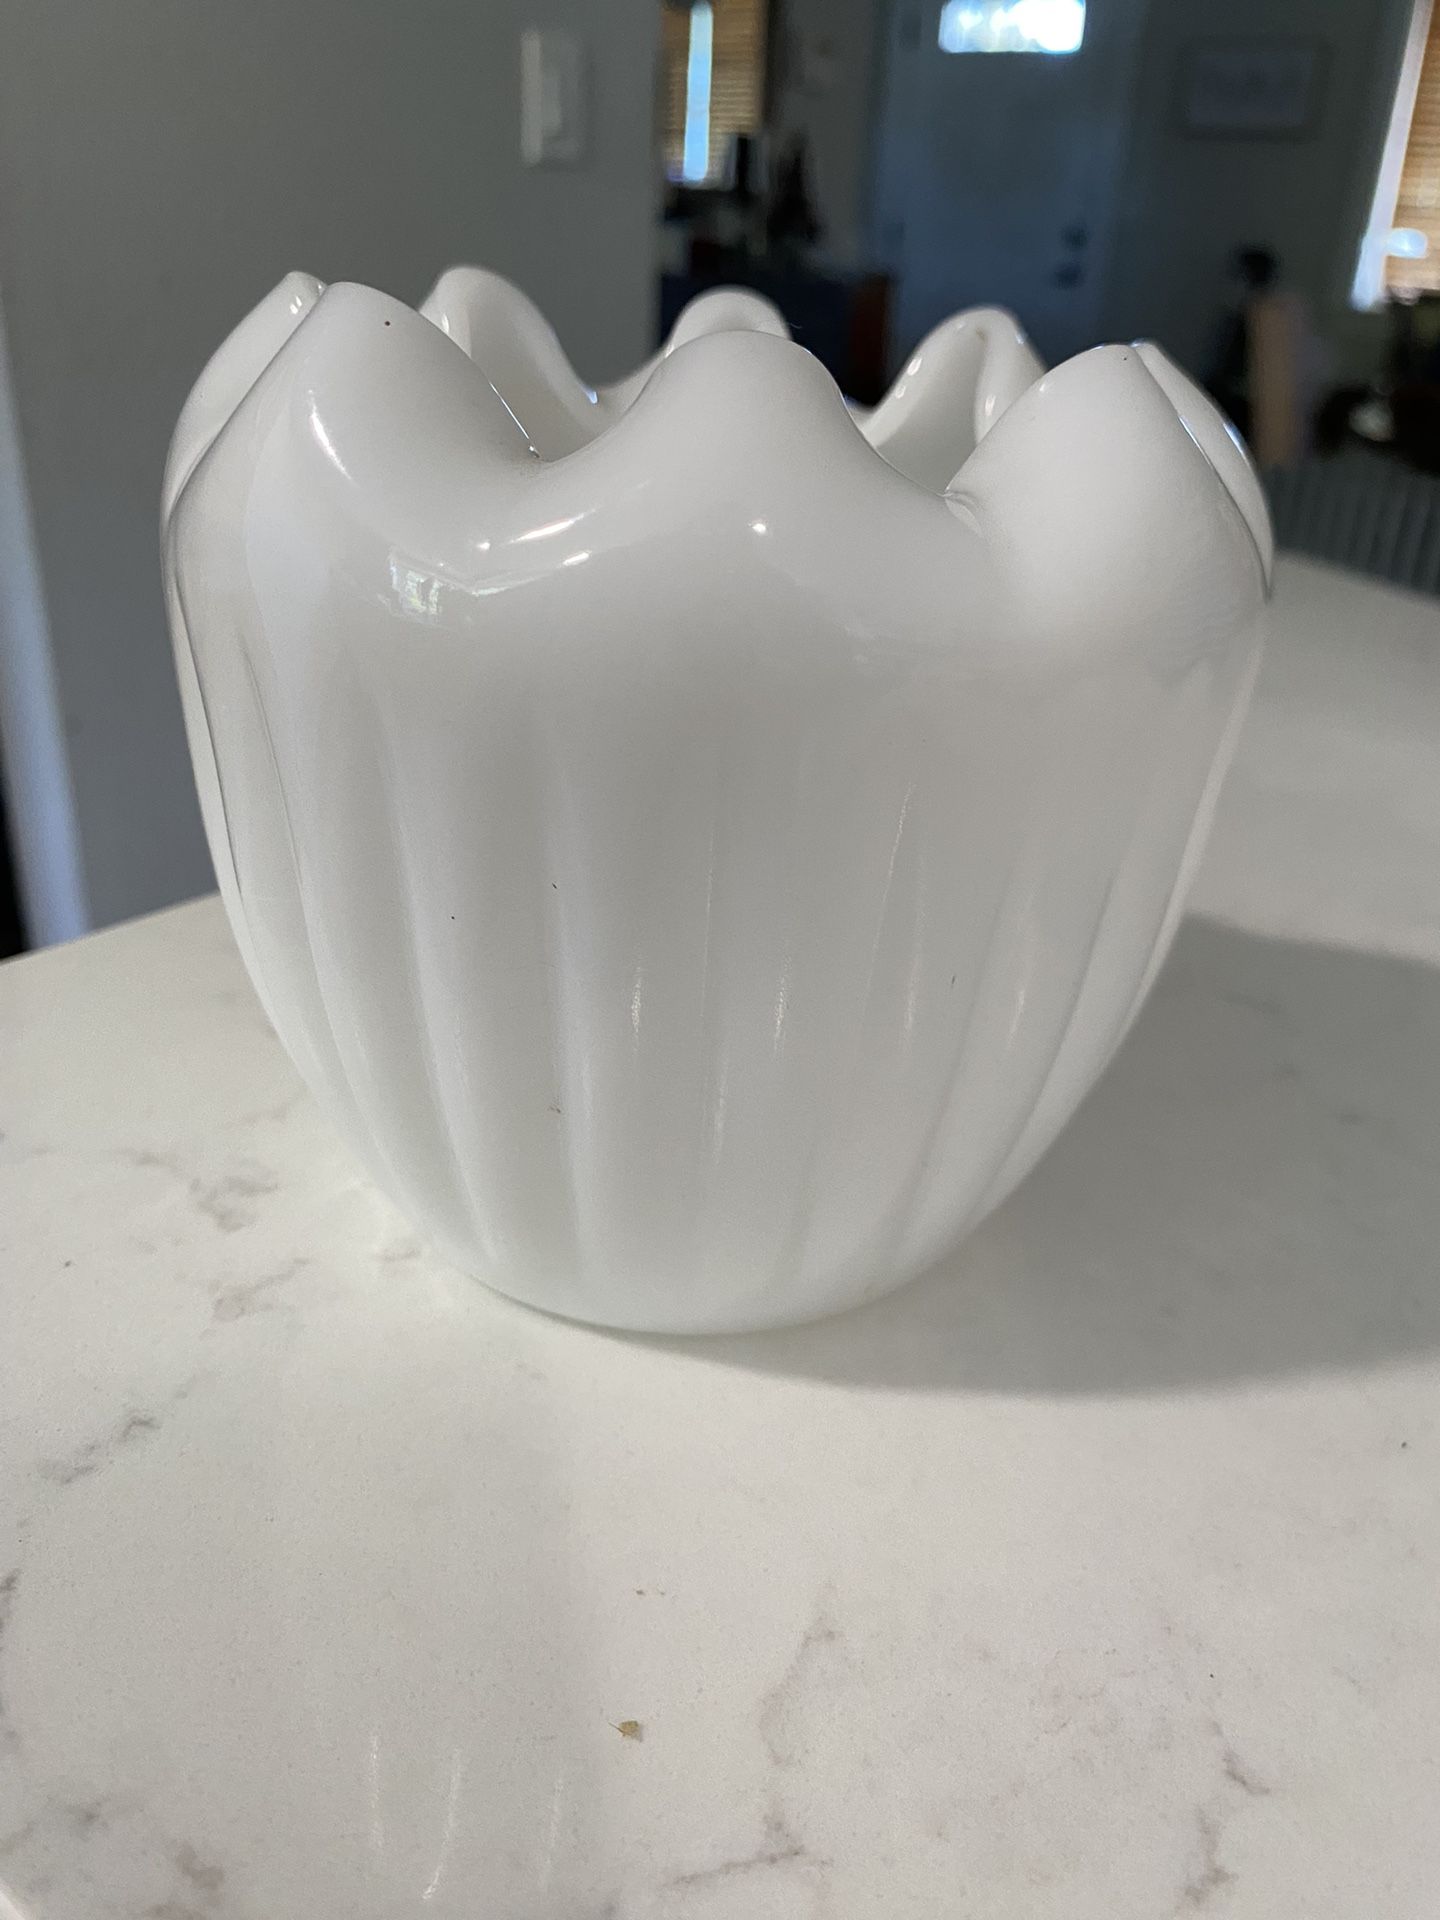 Vintage Ribbed Milk Glass Rose Bowl Planter with Curved Ruffled Top. 